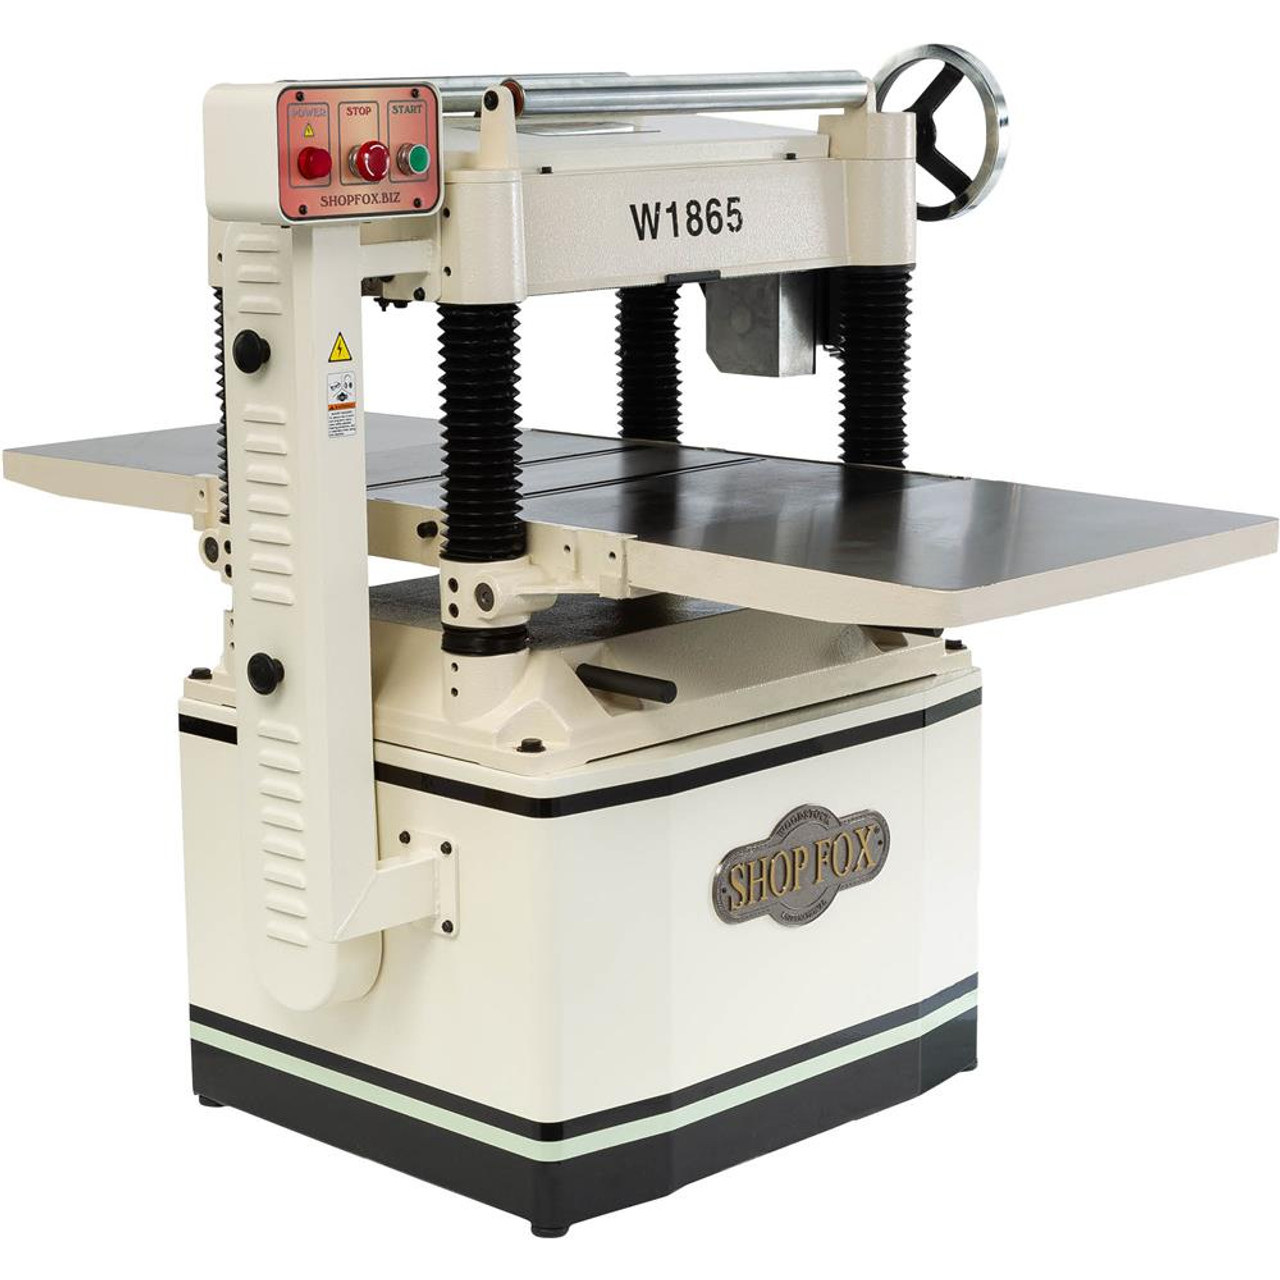 Shop Fox 240V 5HP 20in Planer with Mobile Base & Cutterhead - W1754H